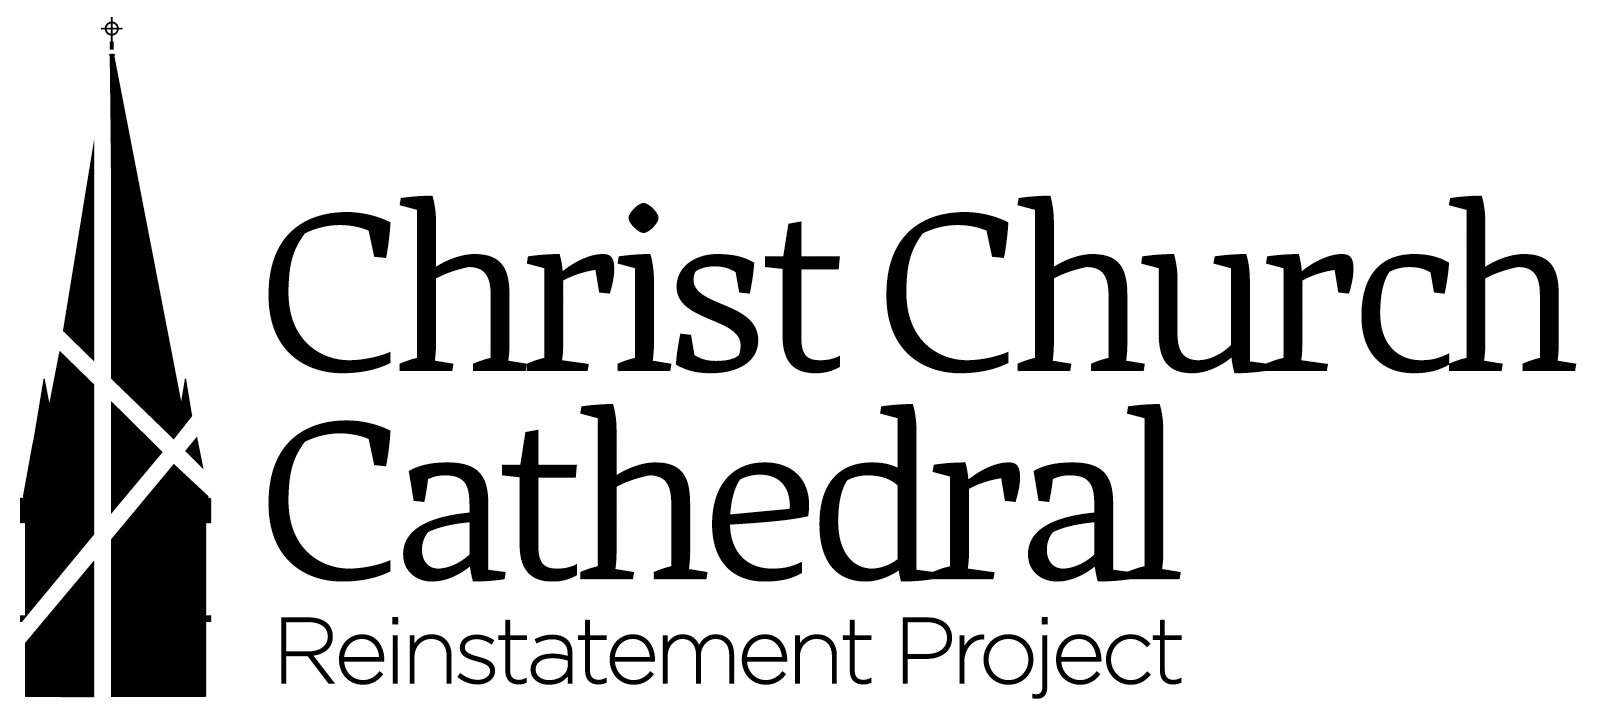 CATHEDRAL REINSTATEMENT PROJECT